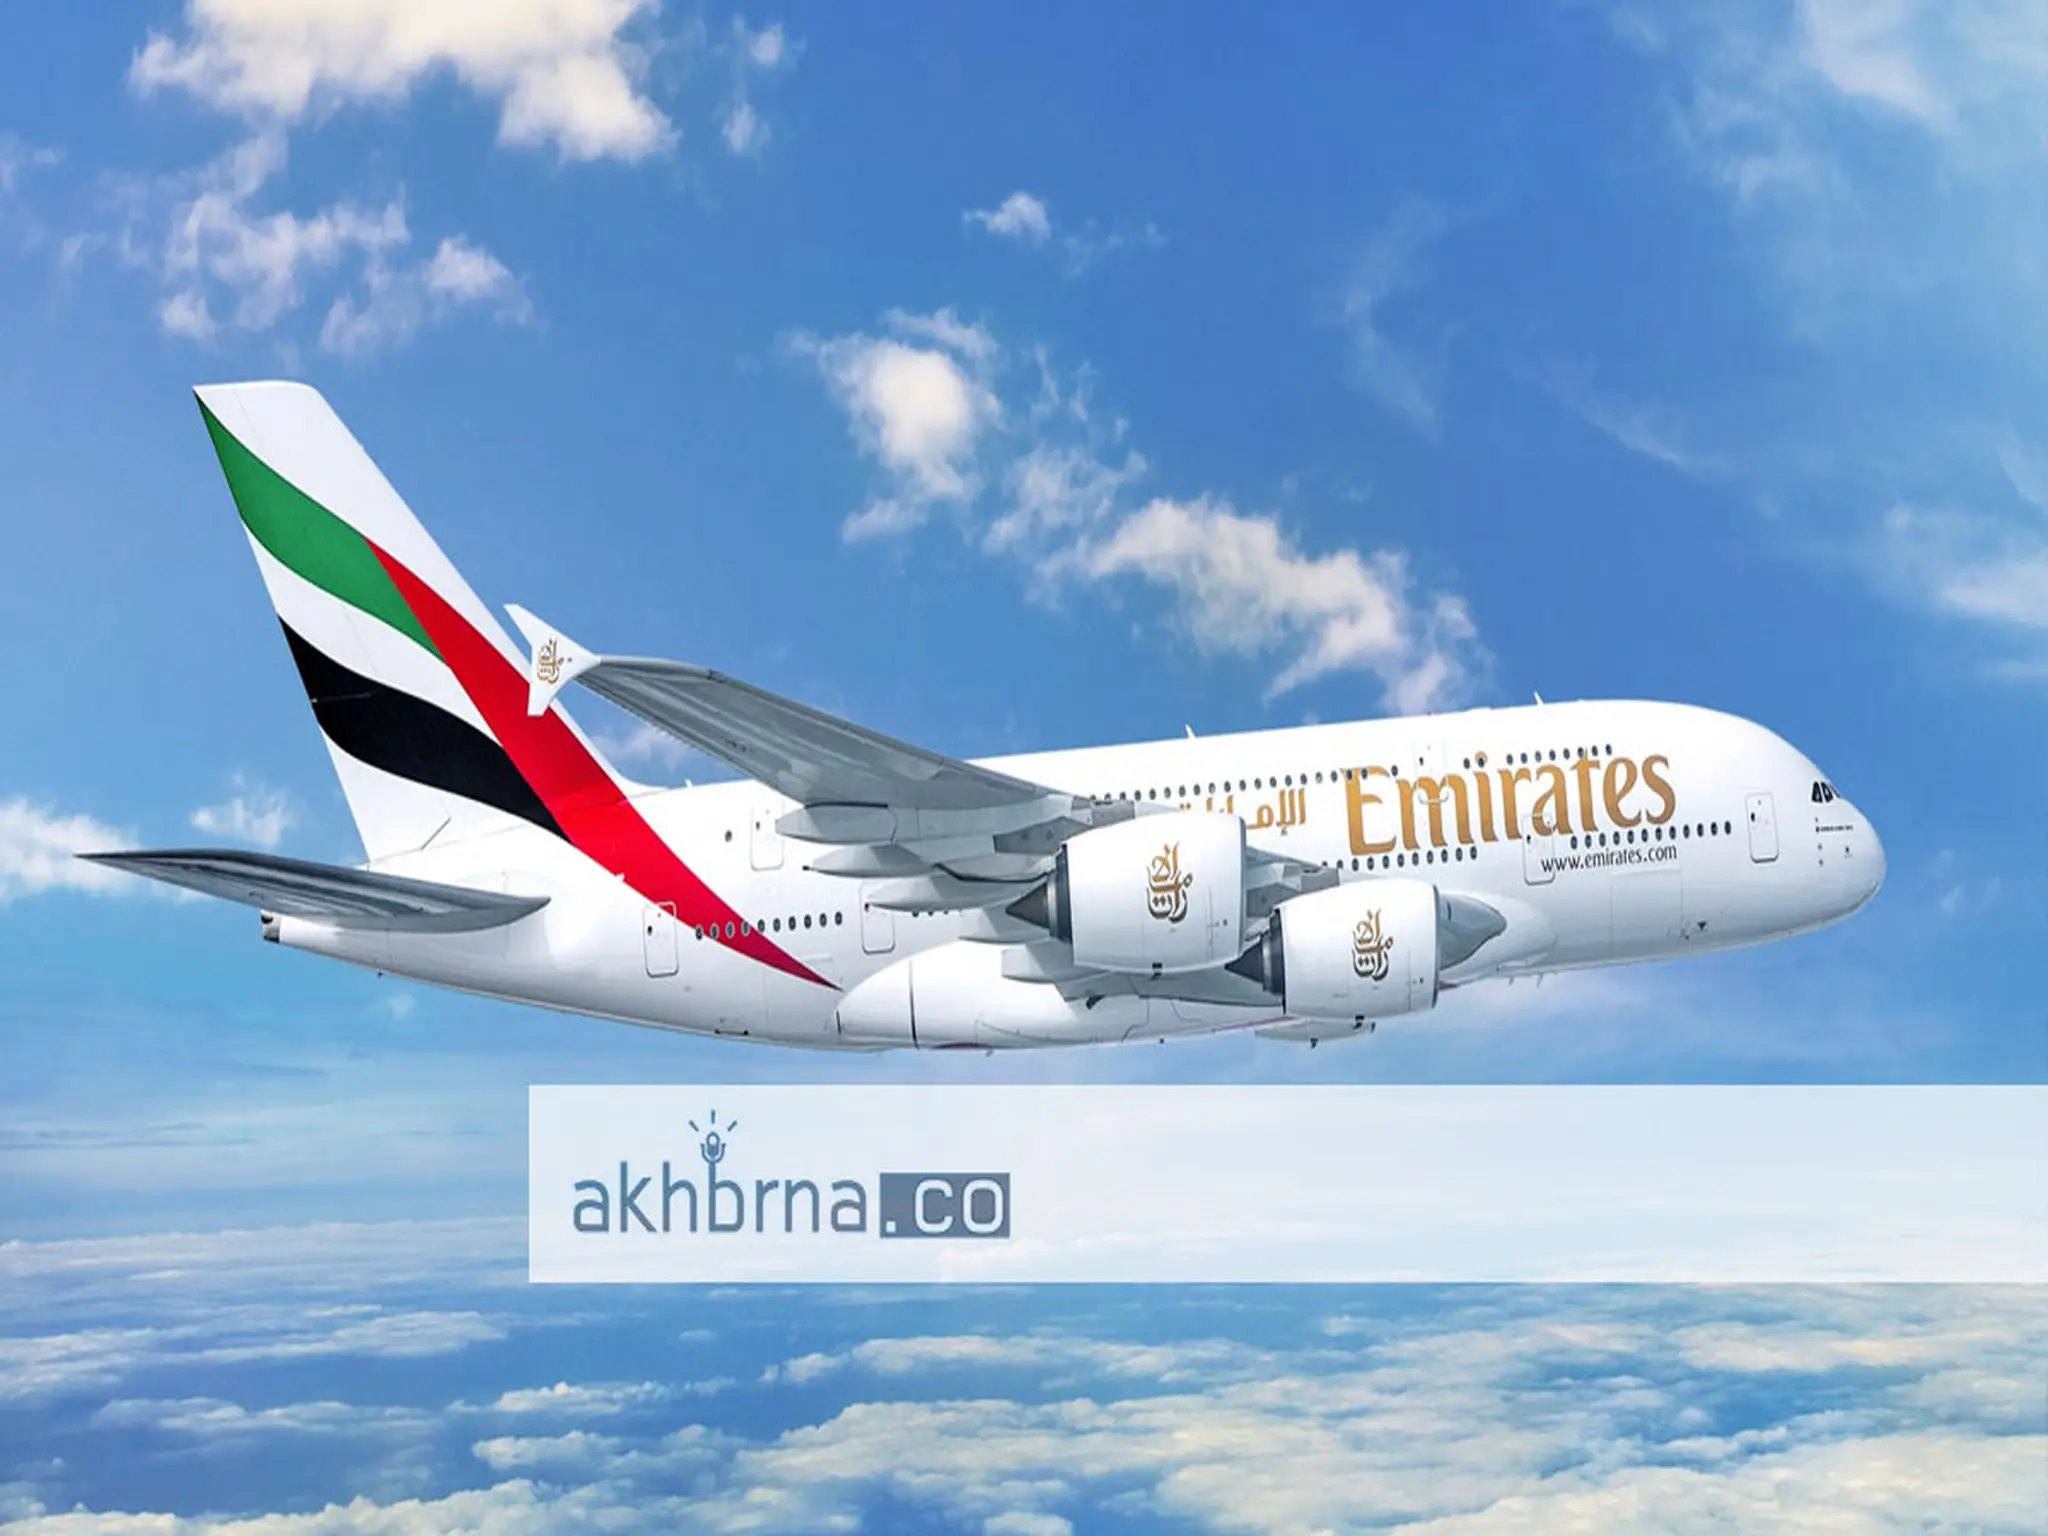 UAE summer vacations: airline announces reduced rates beginning at $80